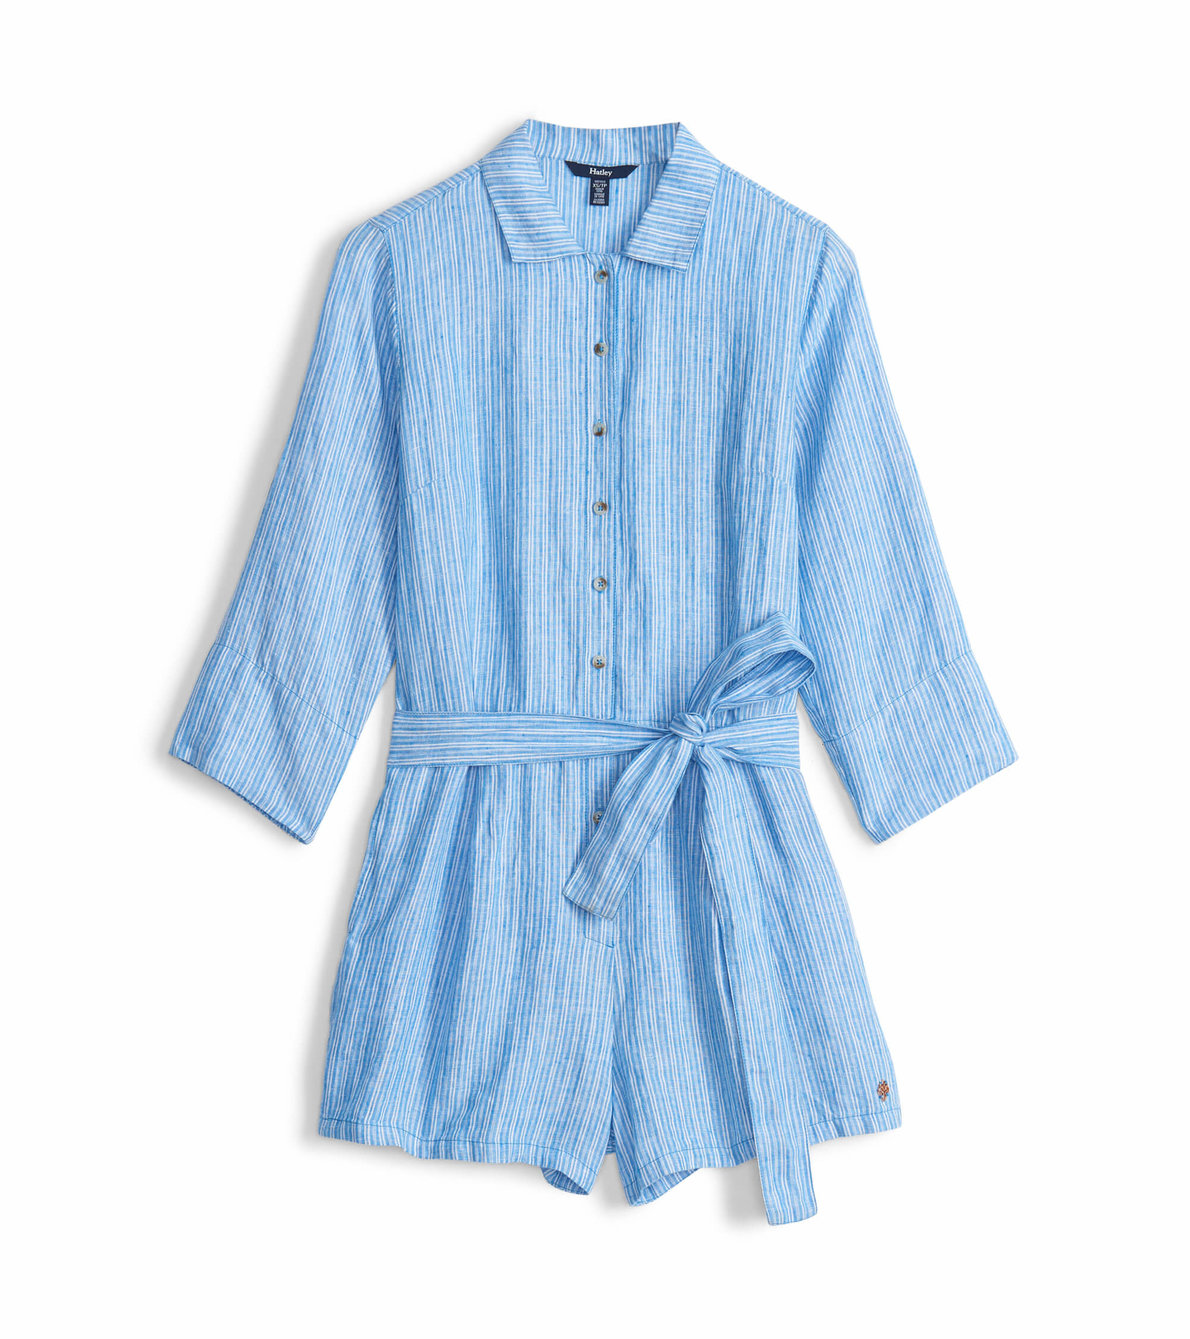 View larger image of Giselle Romper - French Blue Stripes